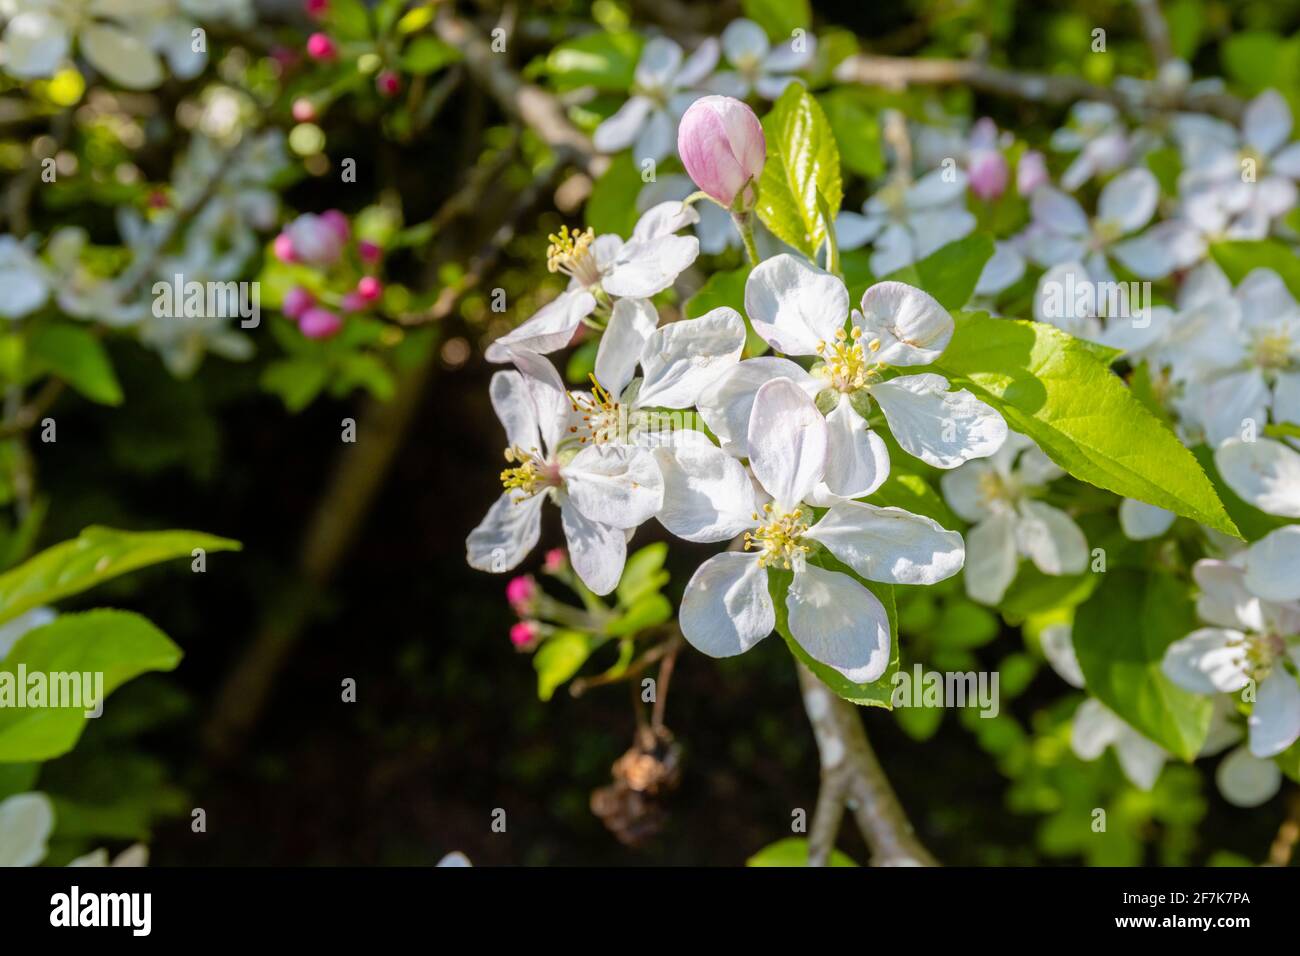 White spring blooming apple tree blossom and pink buds close-up, flowers on a tree in a garden in Surrey, south-east England Stock Photo